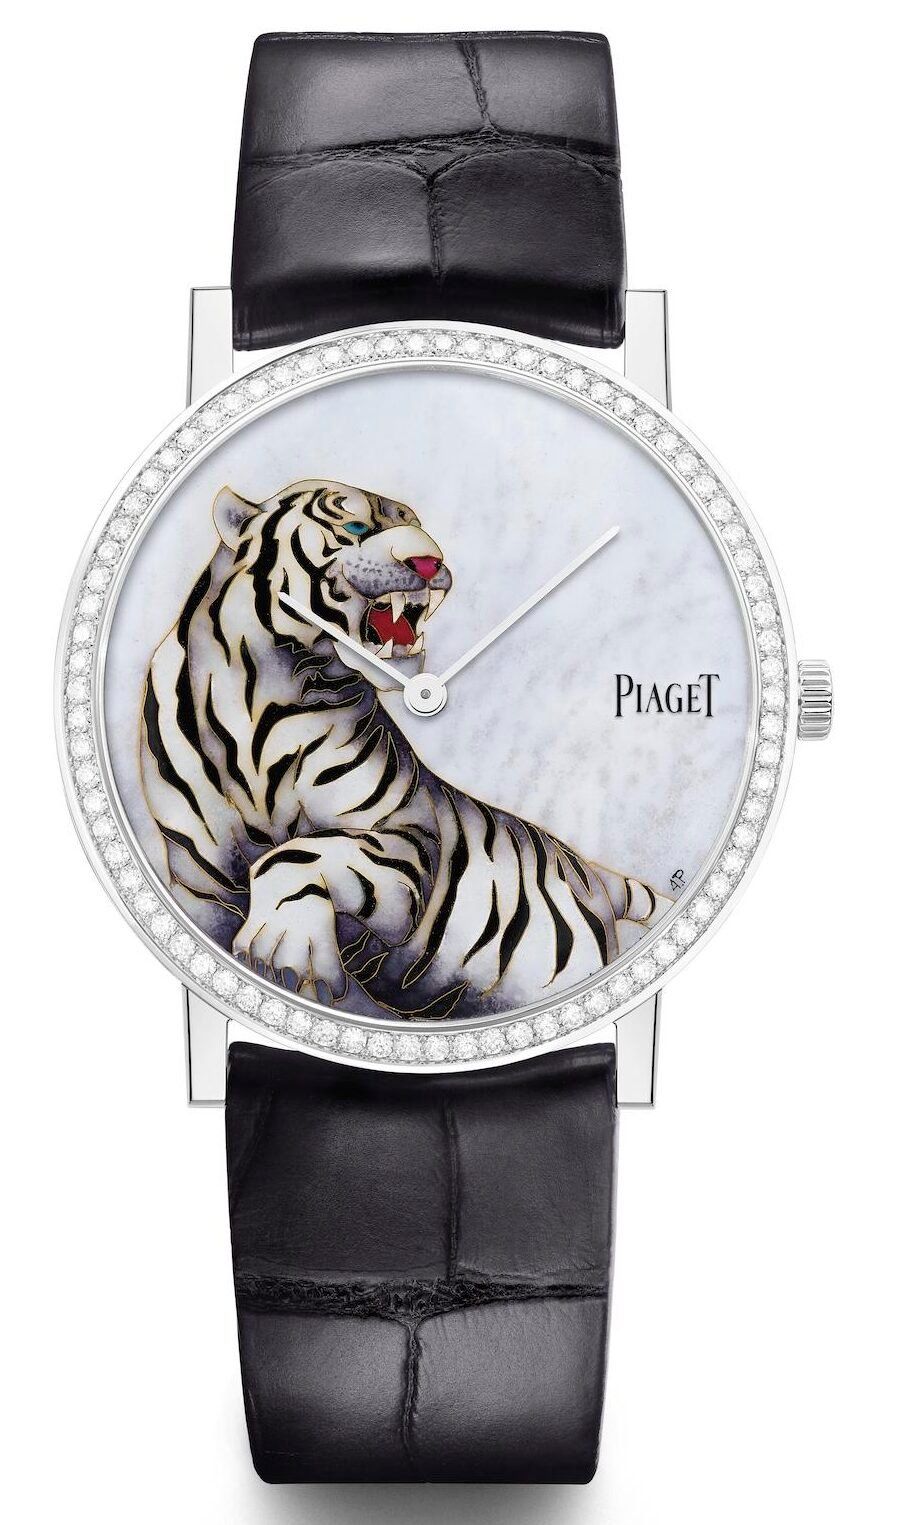 Piaget Altiplano Watches in India | The Hour Markers